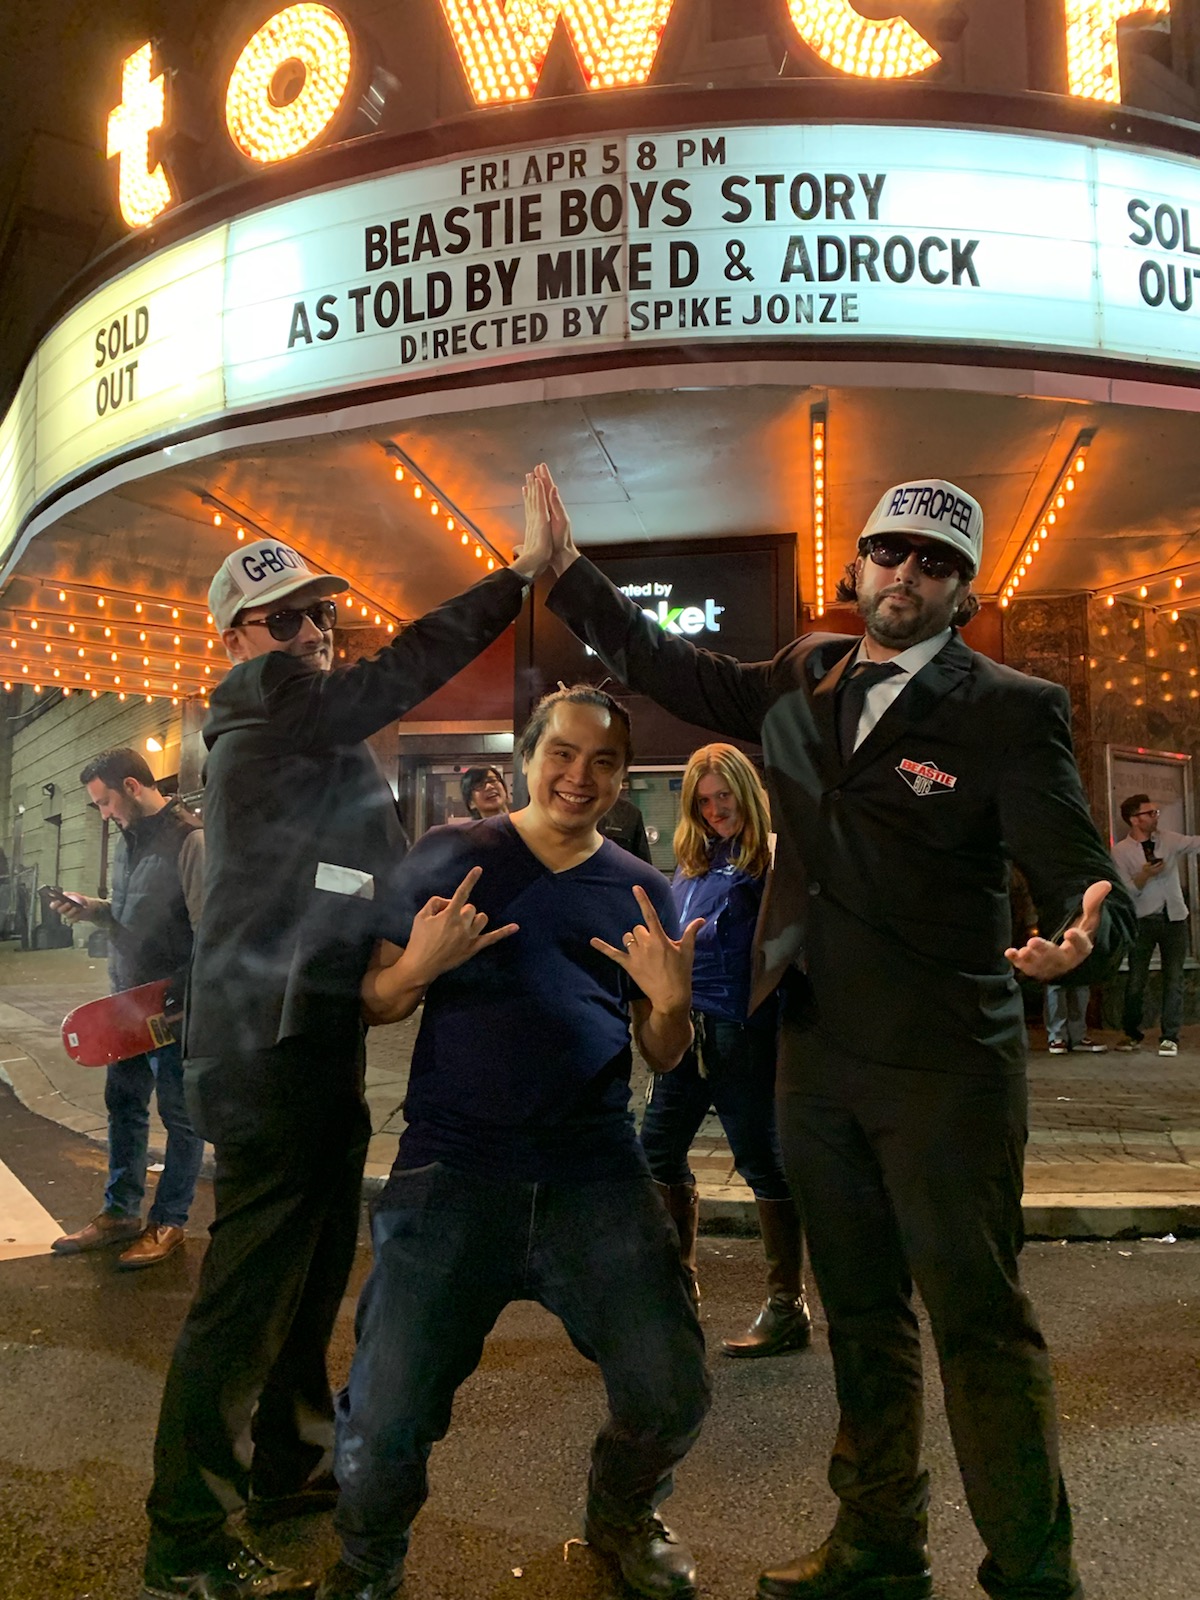 Lee shrugs at Beastie Boys reading (Tower Theatre).